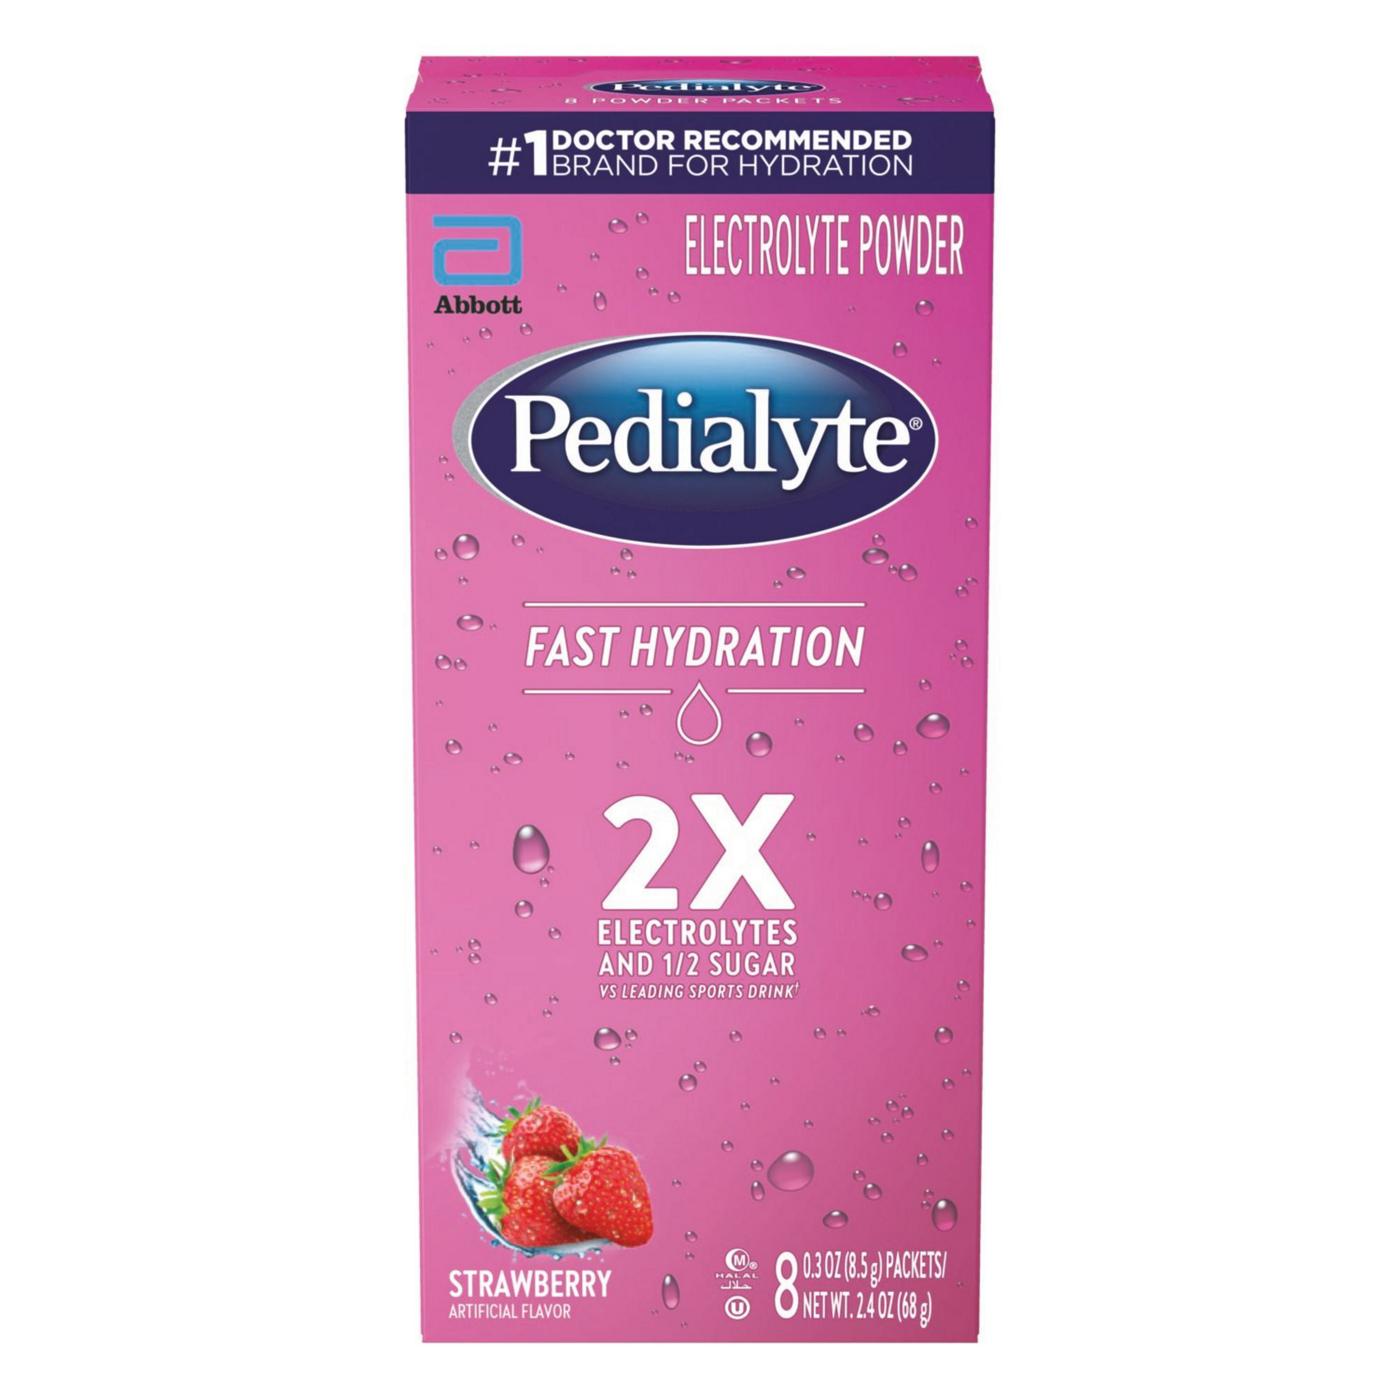 Pedialyte Fast Hydration Electrolyte Packets - Strawberry; image 1 of 8